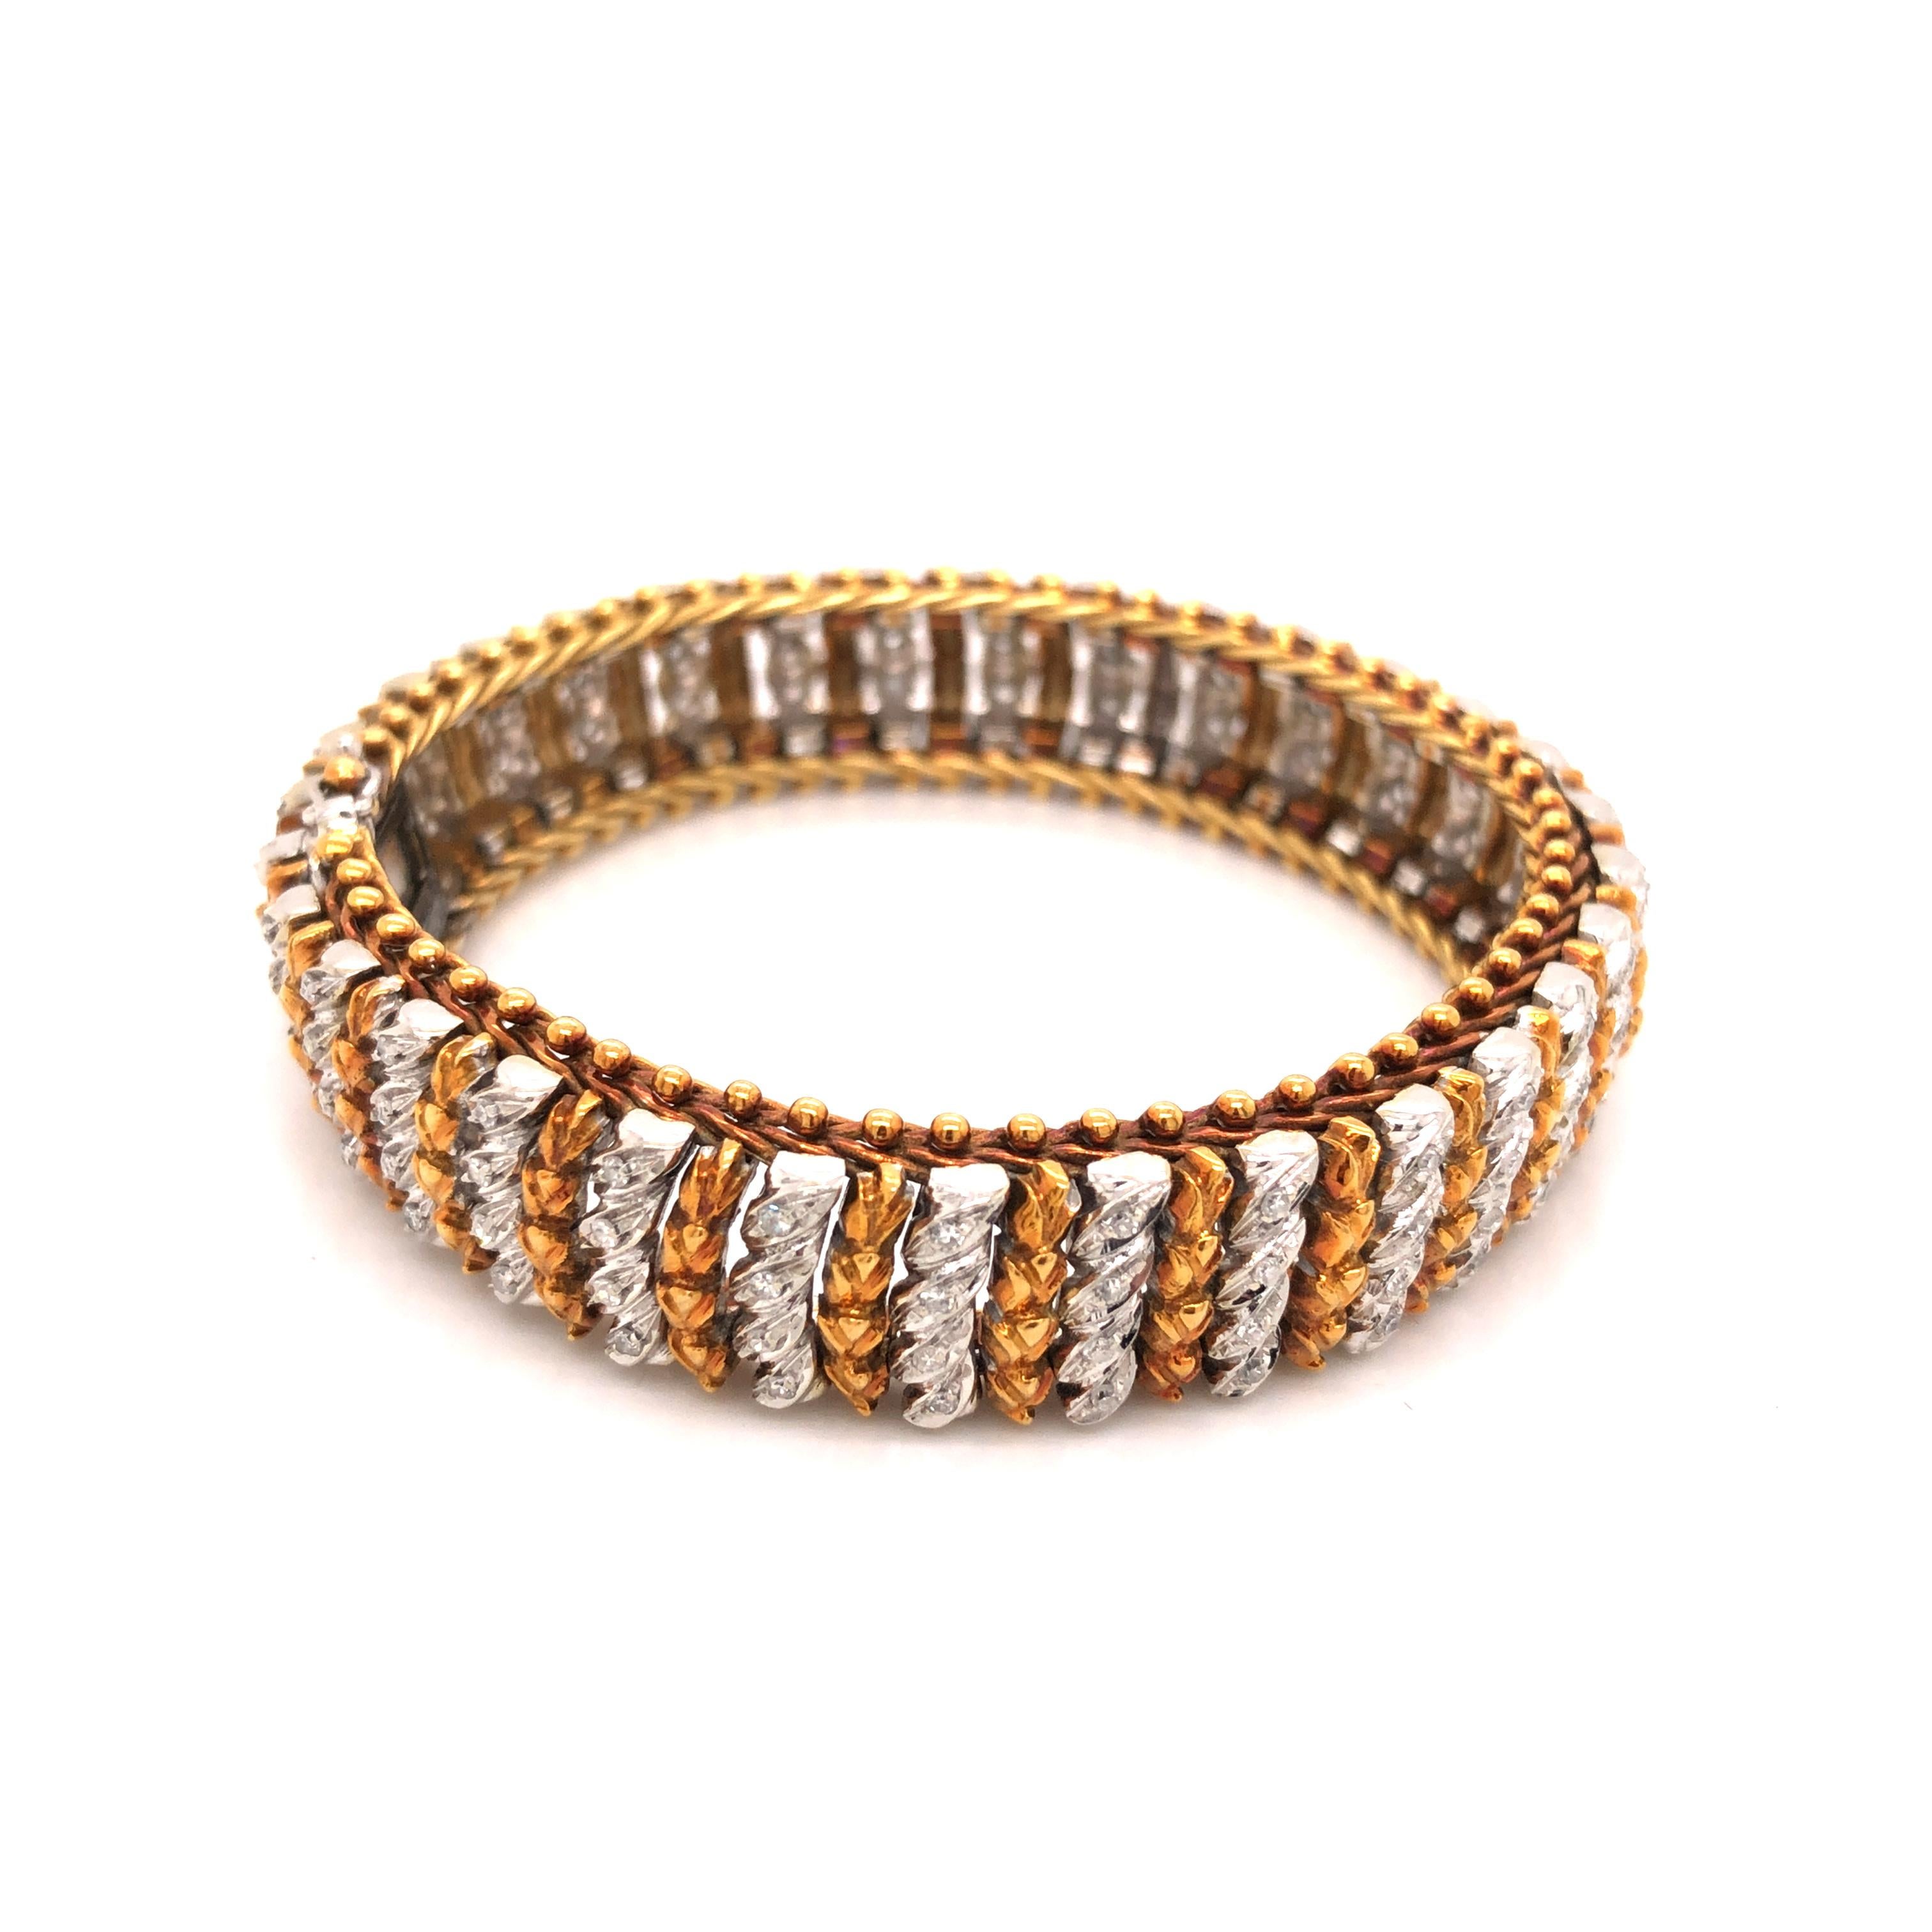 A vintage 18K two tone gold bracelet featuring single-cut diamonds weighing a total of approximately 0.60 carat, G-H-I Color, SI clarity.

Stone: Diamond ~ .60 carat

Metal: 18K White & Yellow Gold

Size: 6